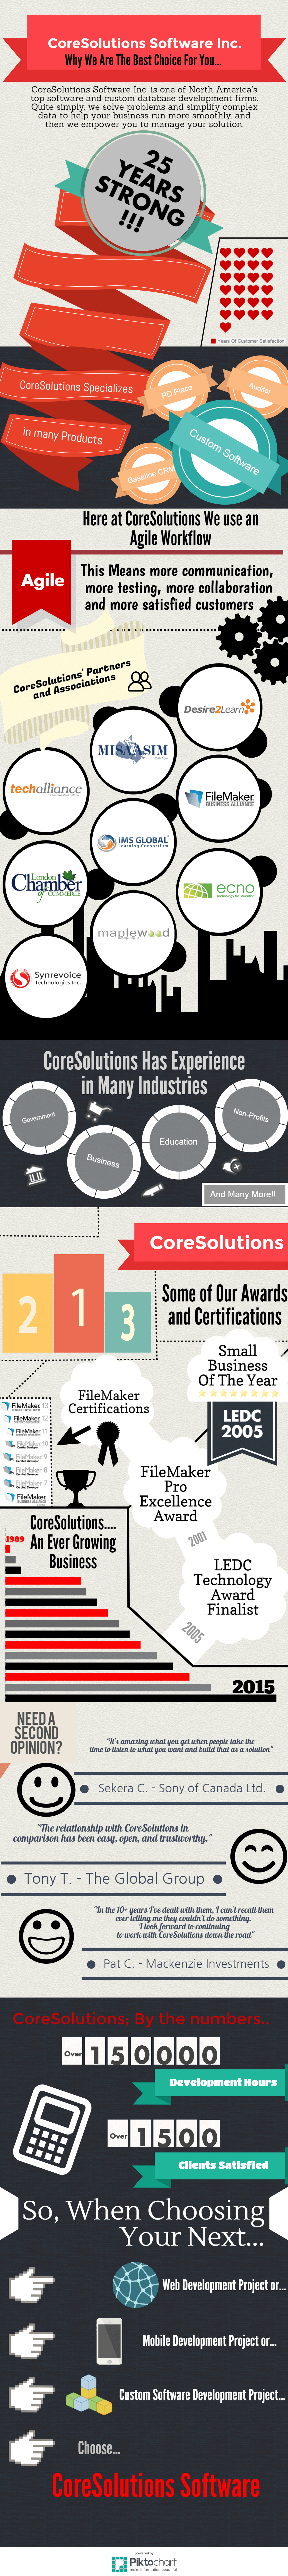 Why CoreSolutions? Infographic